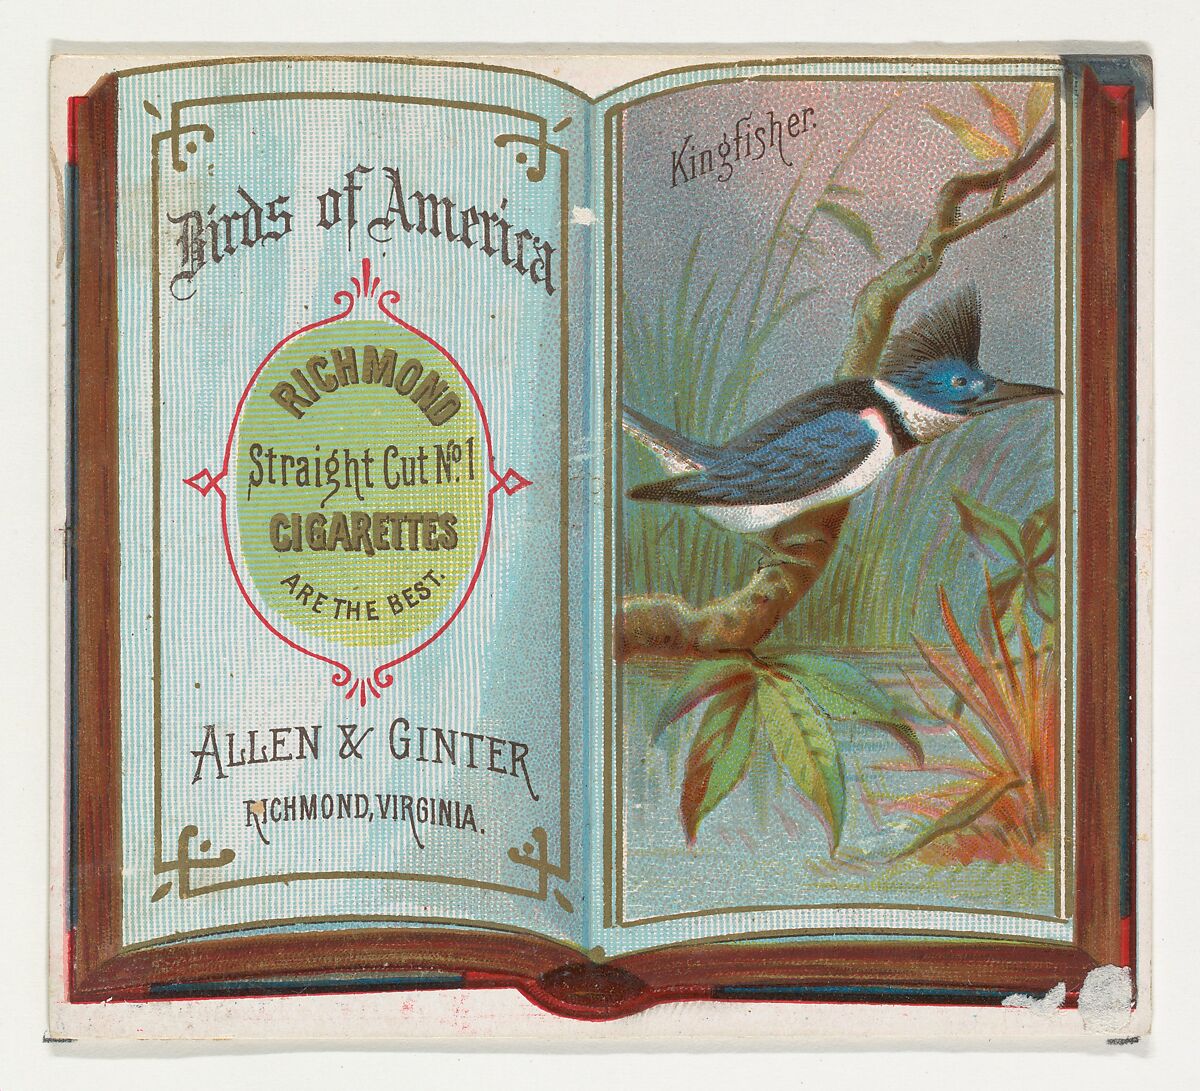 Kingfisher, from the Birds of America series (N37) for Allen & Ginter Cigarettes, Issued by Allen &amp; Ginter (American, Richmond, Virginia), Commercial color lithograph 